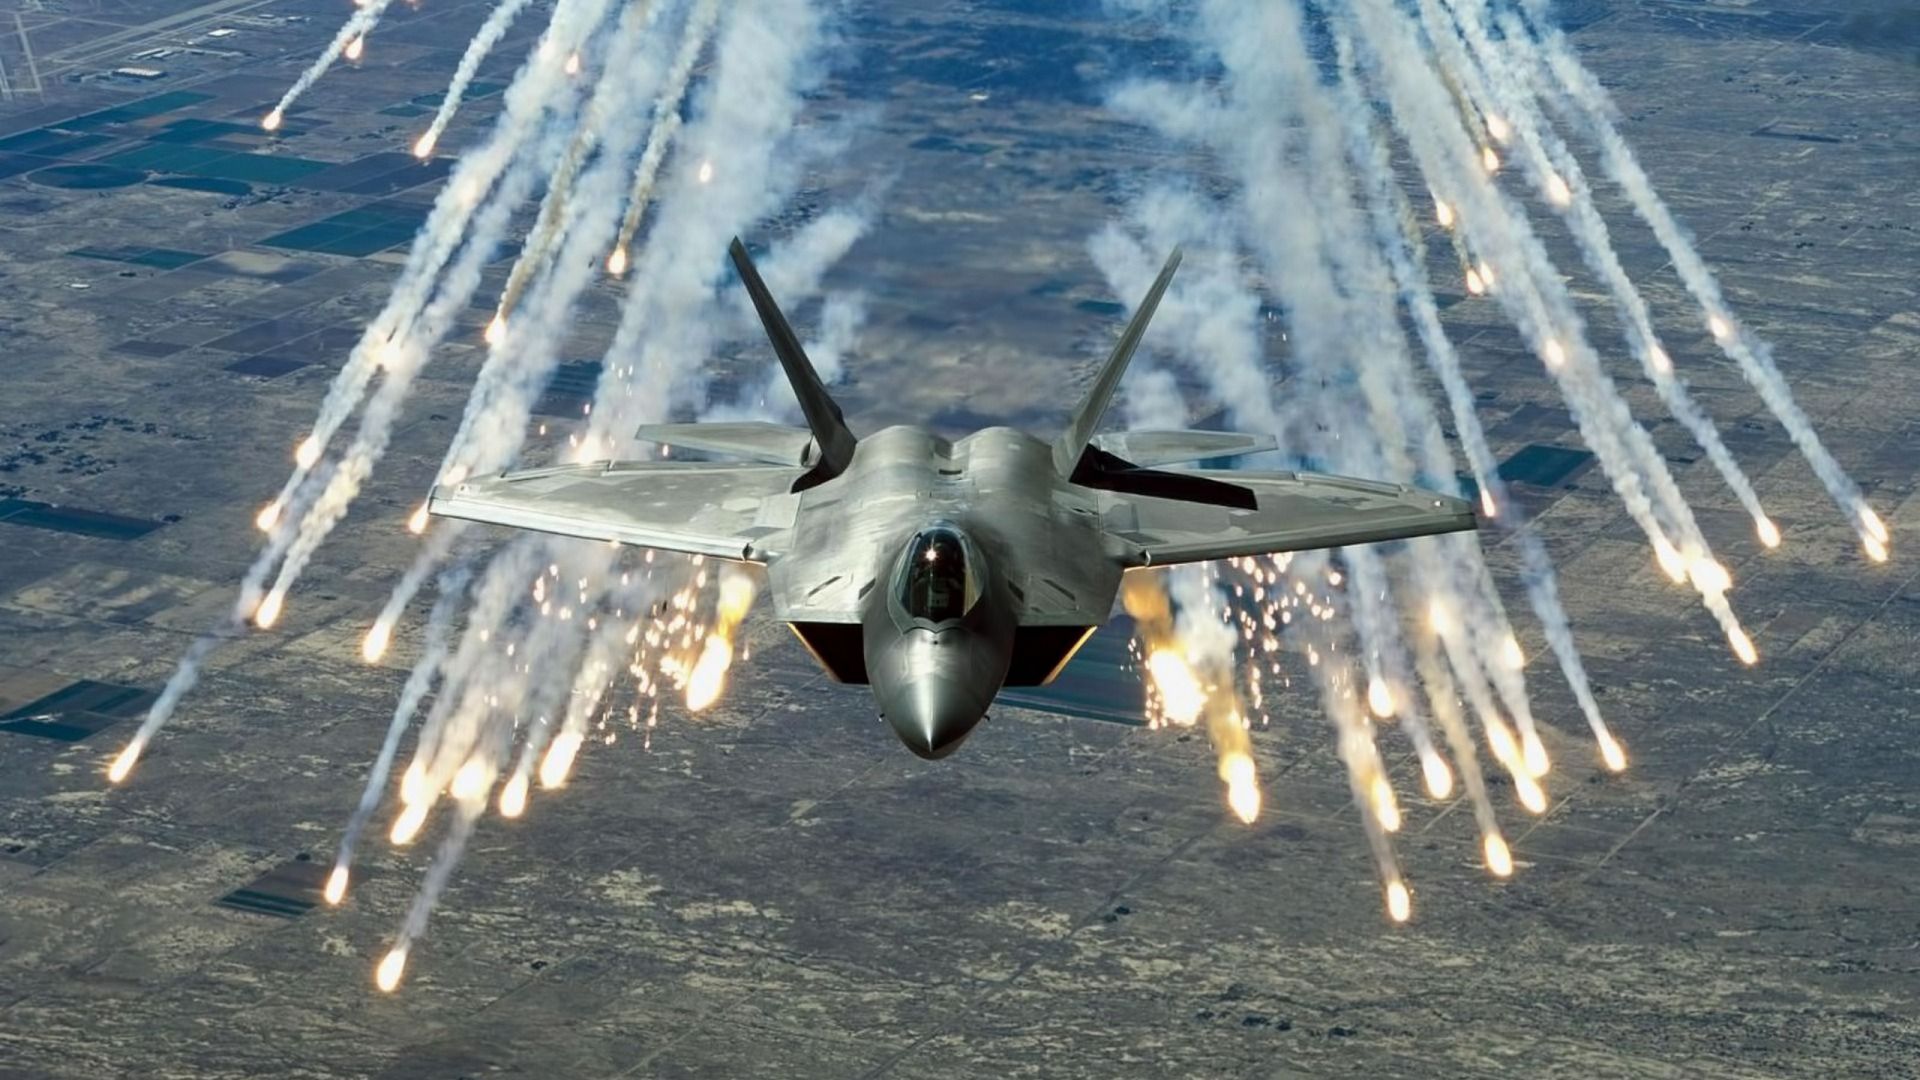 Raptor F-22, Martin, shooting, stealth, air superiority fighter, U.S. Air Force (horizontal)